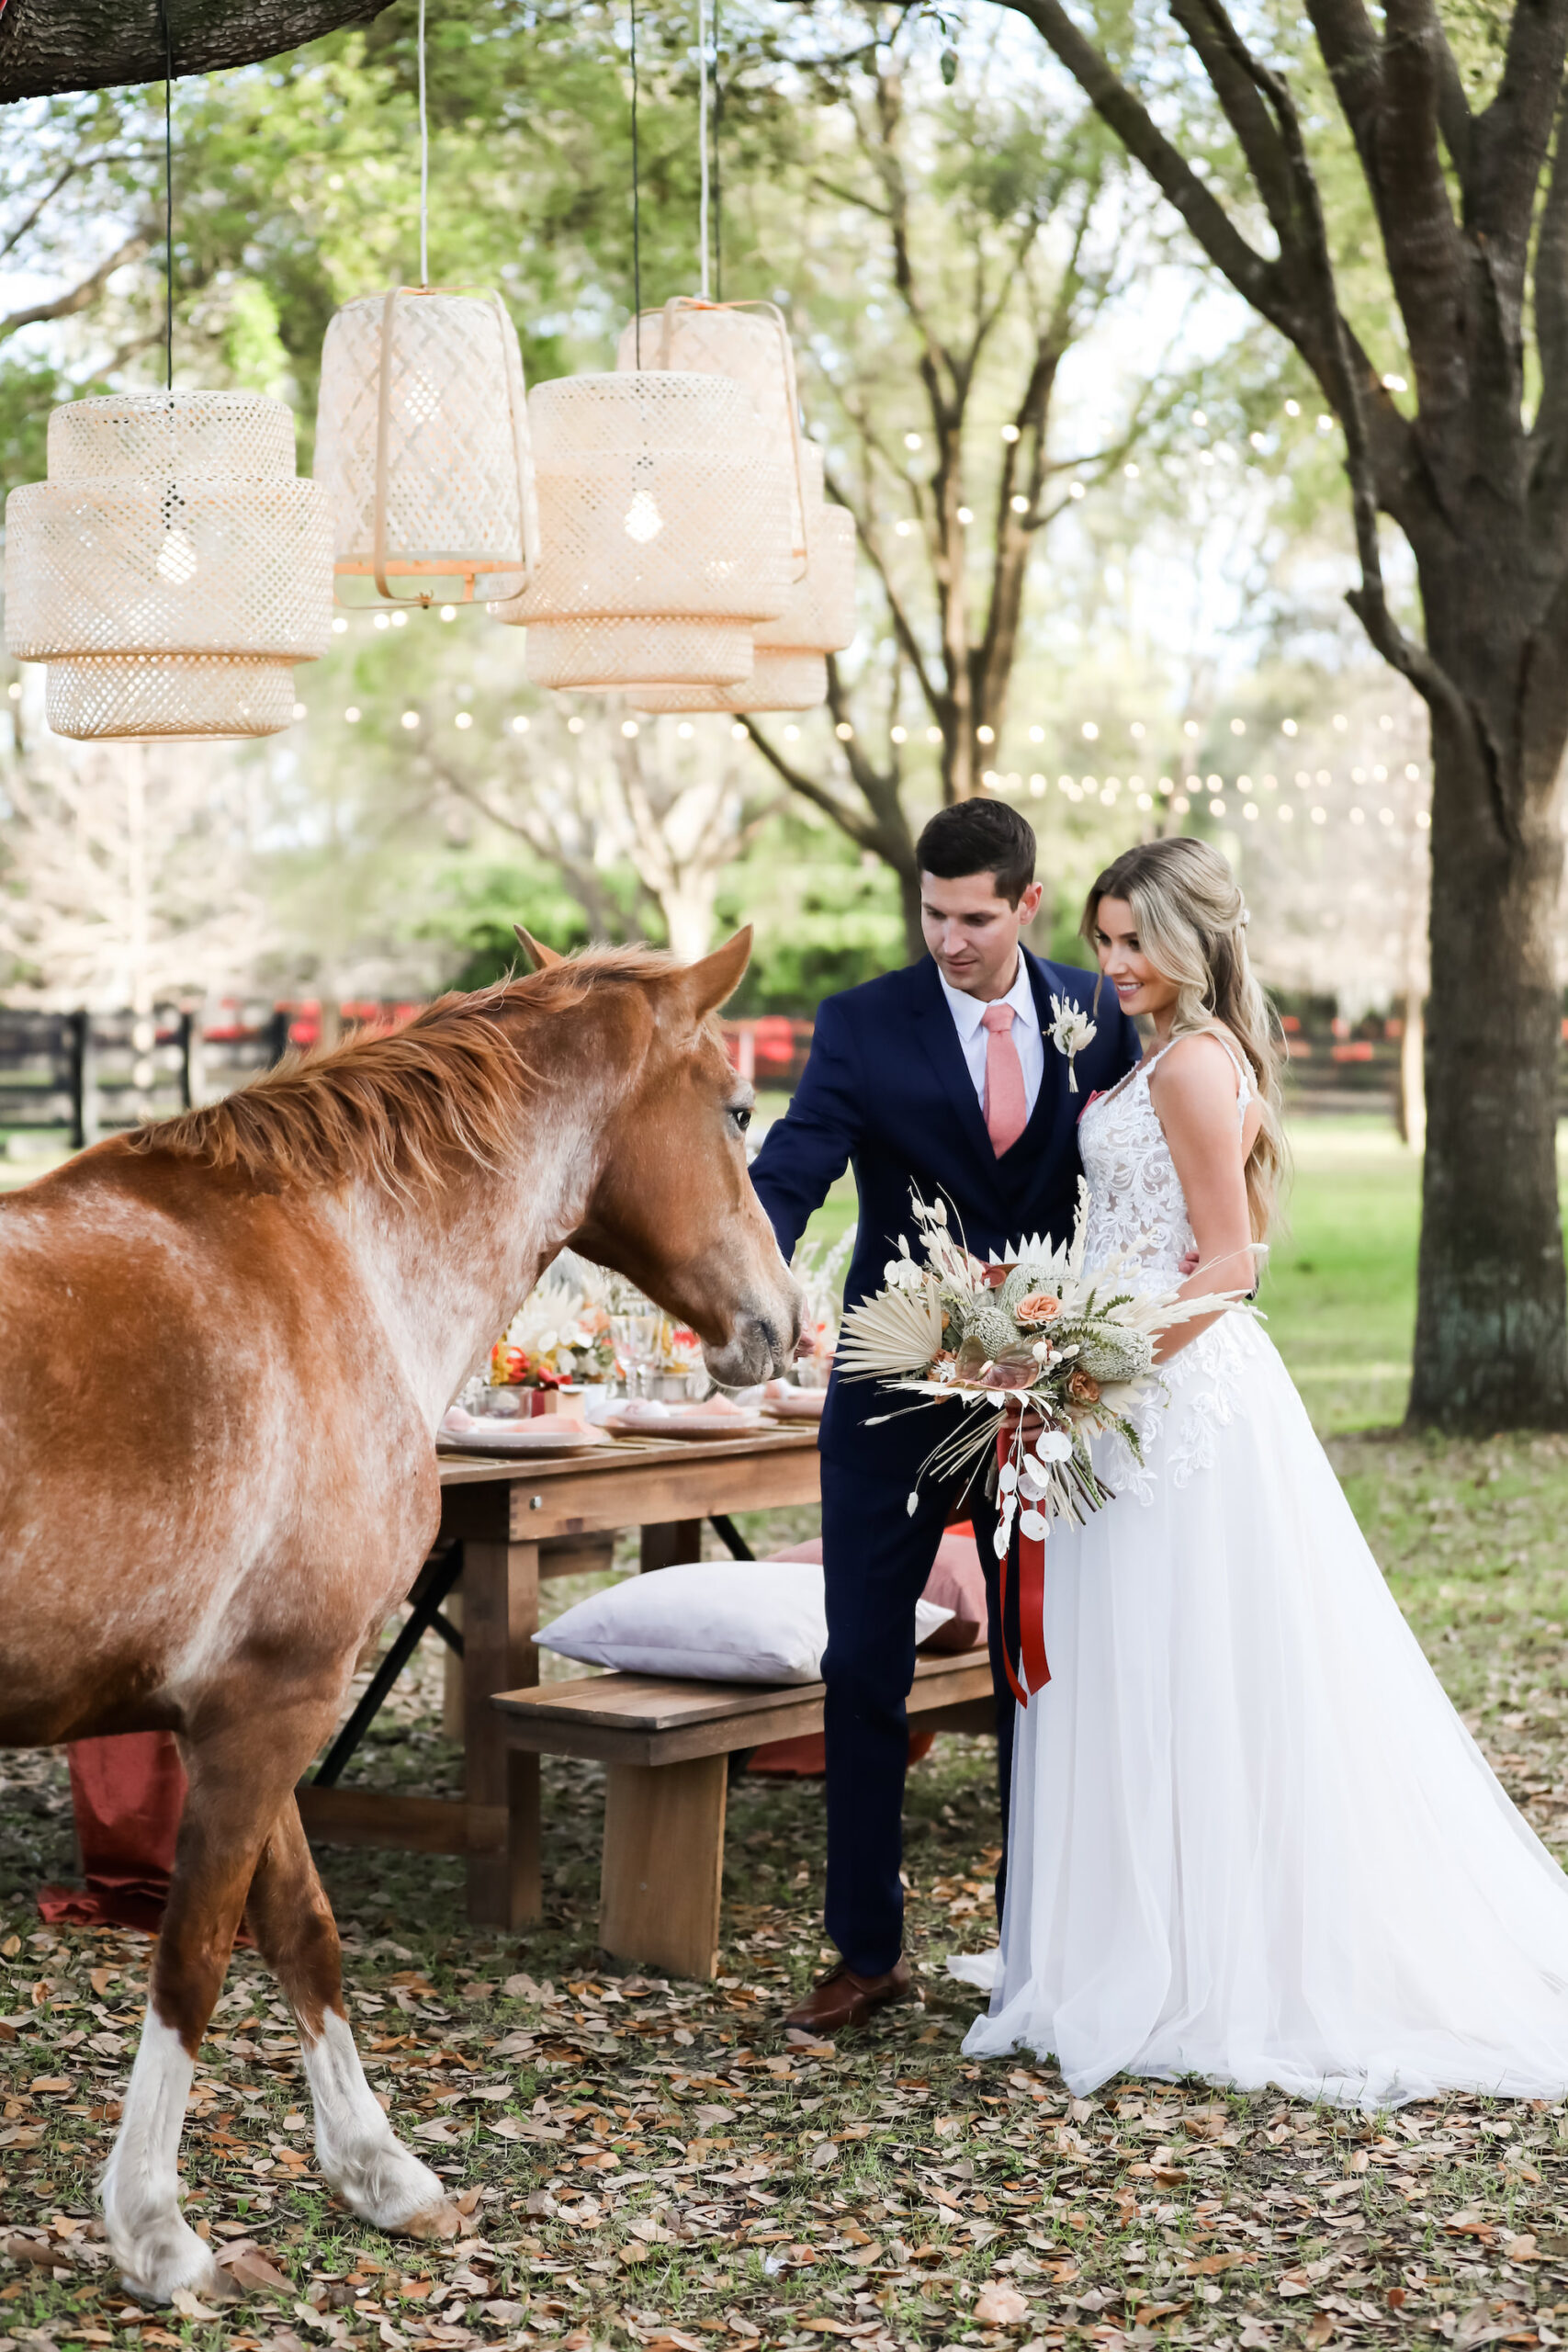 Bride and Groom with Horse Wedding Portrait at Outdoor Fall Reception Ideas | Tampa Bay Wedding Venue Mision Lago Estate | Lifelong Photography